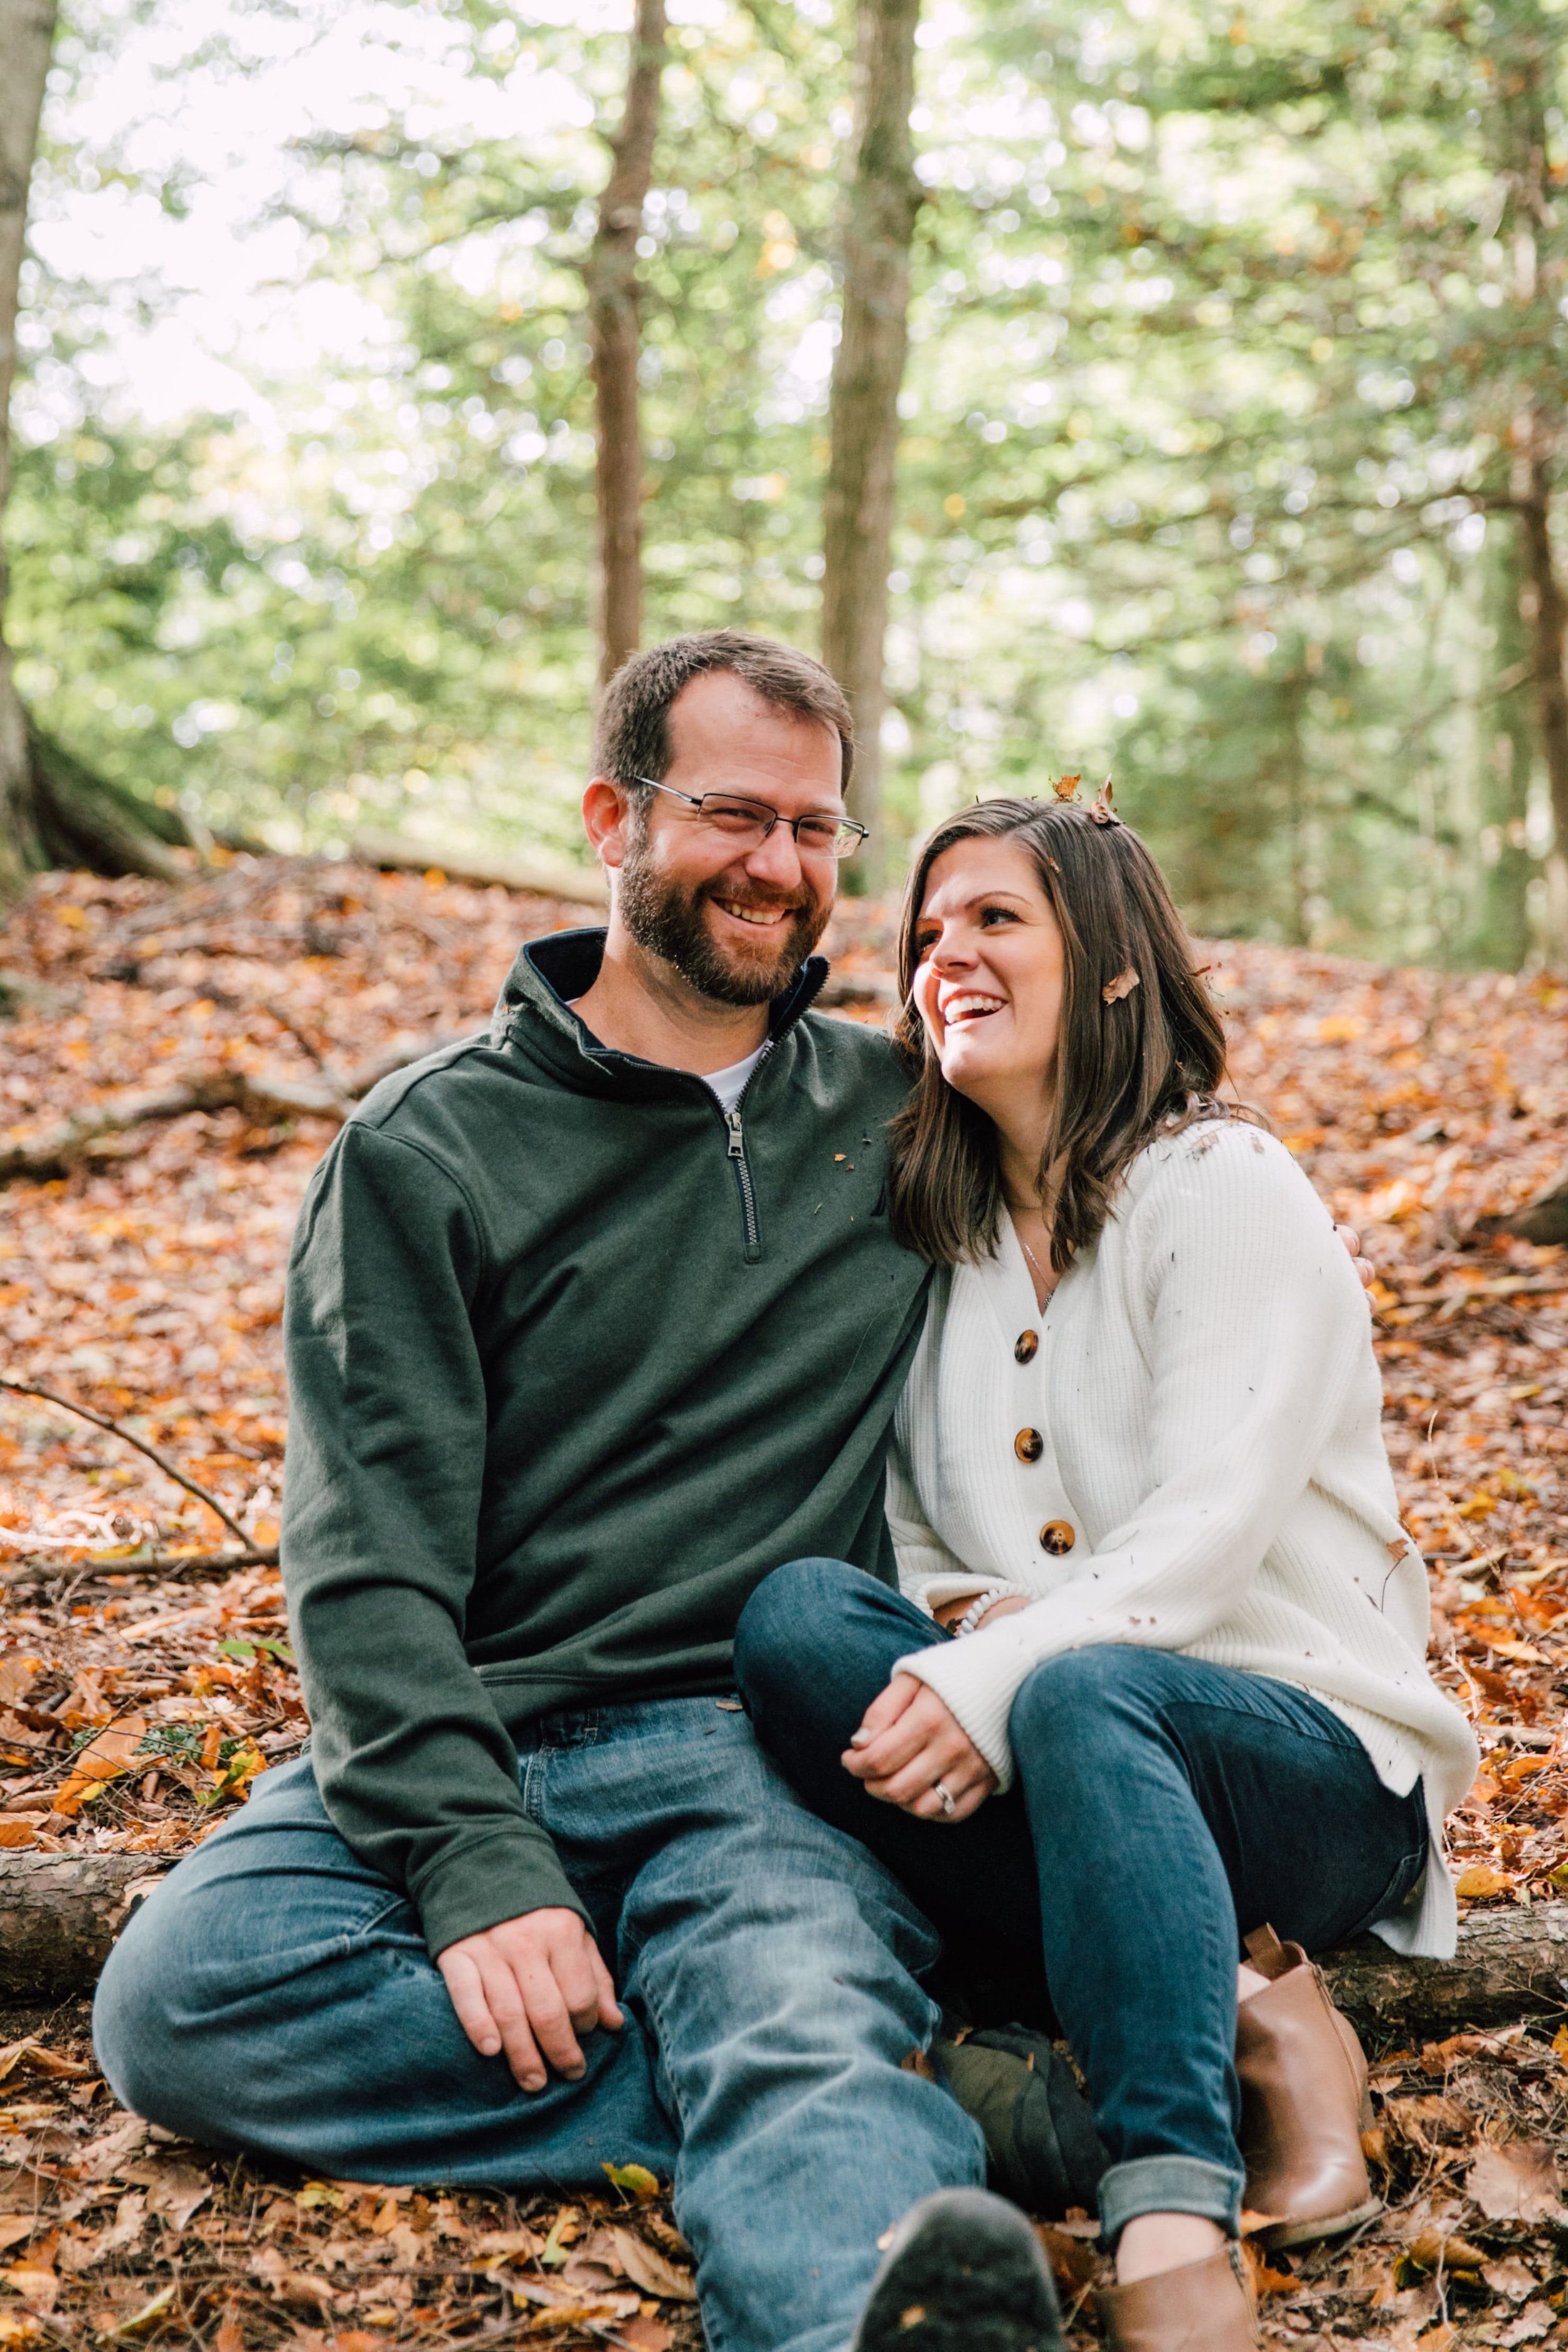  megan and barret’s fall engagement photos are full of laughs and leaves pictured here, they laugh together as they are cuddled up on the fall leaf lined ground with falling leaves around them 